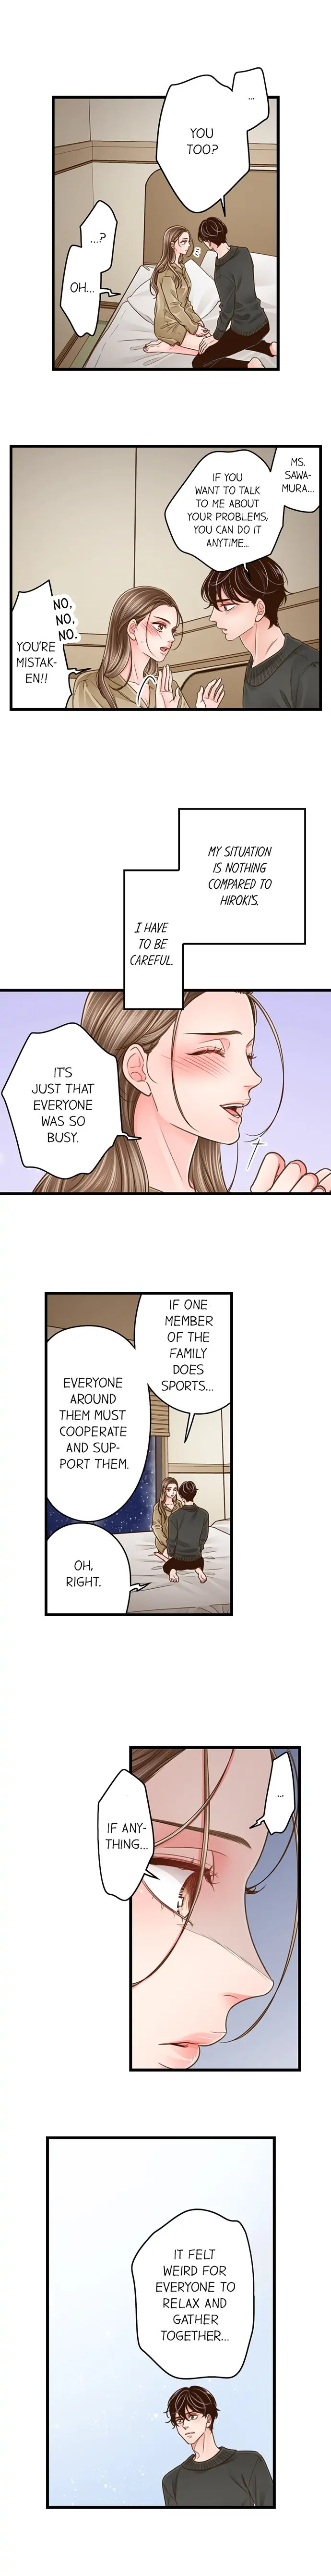 Yanagihara Is a Sex Addict. - Chapter 199 Page 3